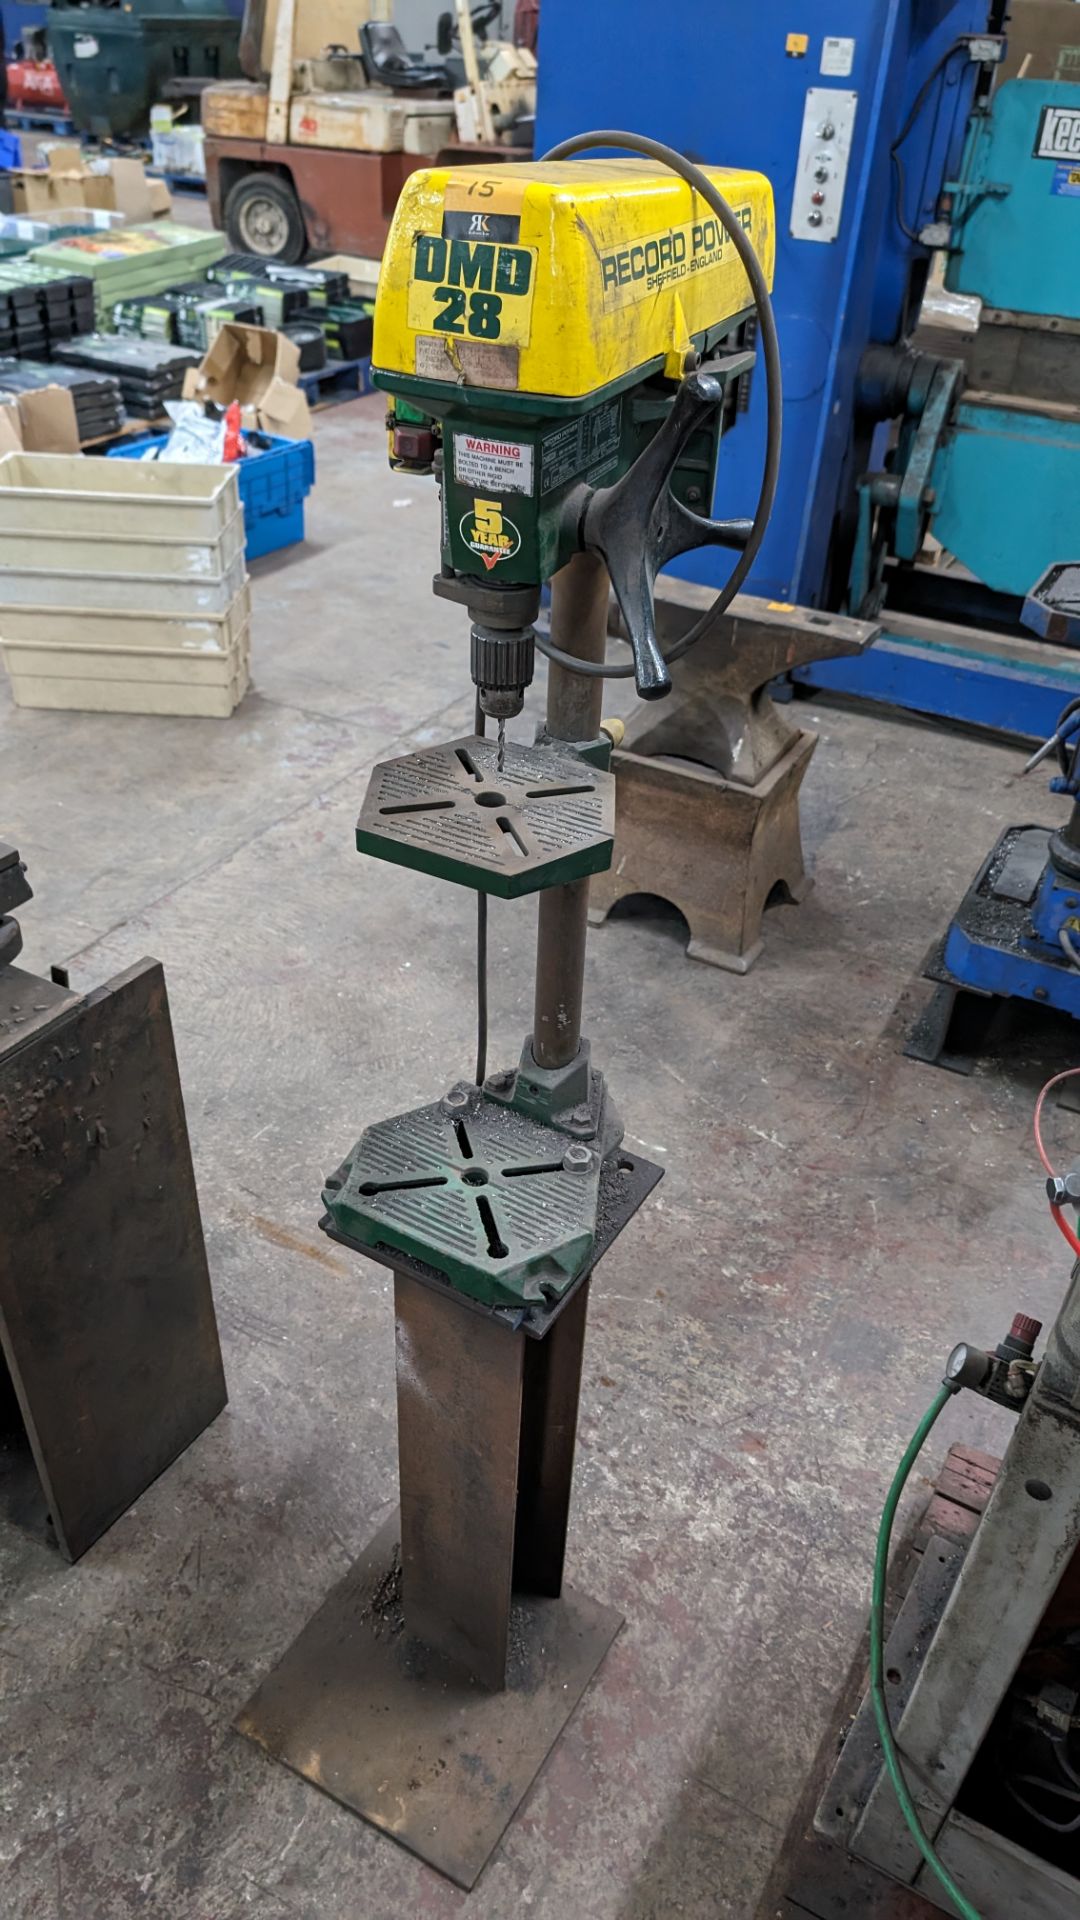 Record power model DMD28 drill on dedicated single pedestal heavy duty column stand - Image 2 of 5